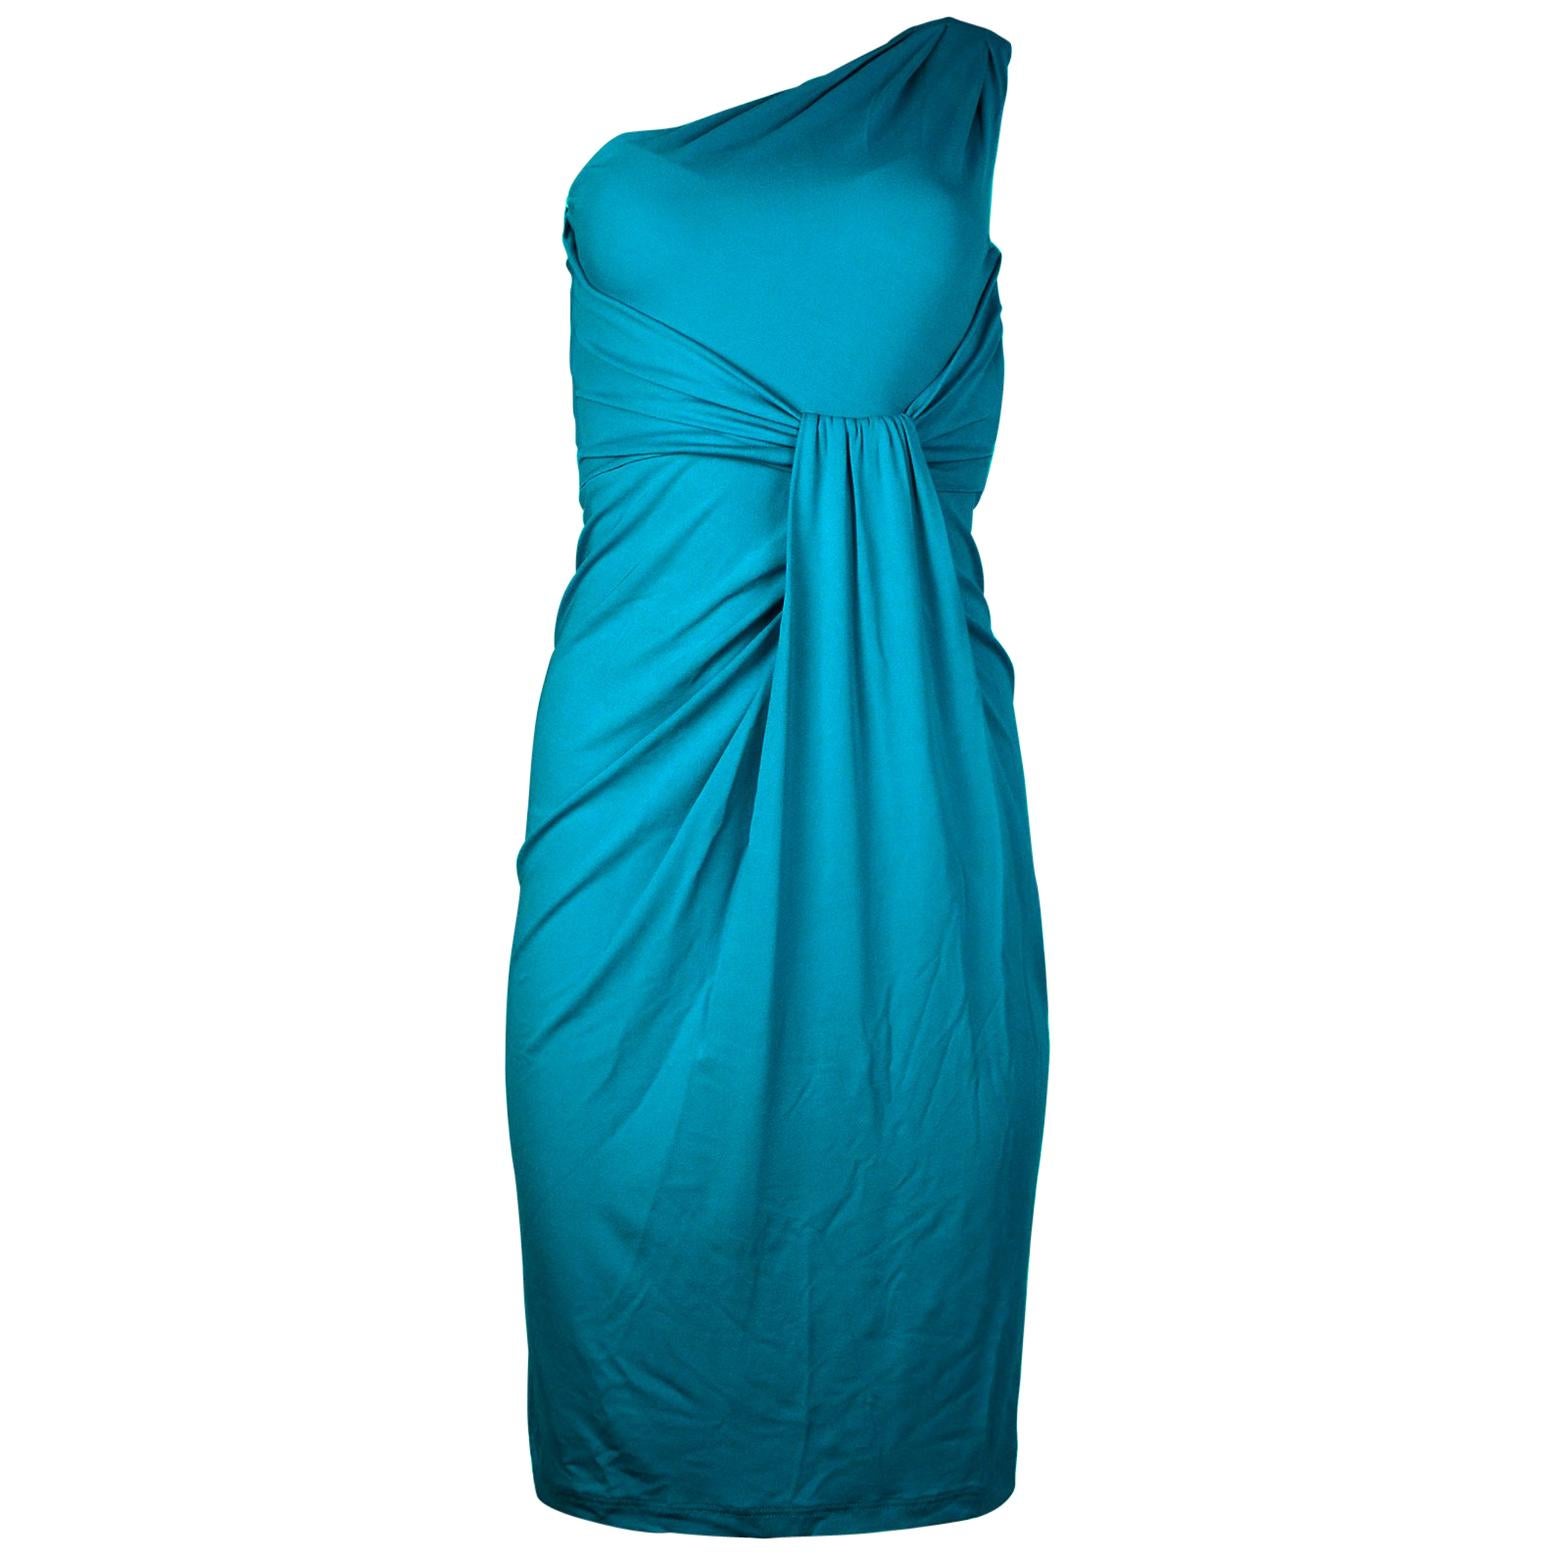 Michael Kors Turquoise Jersey One Shoulder Dress Sz 4 For Sale at ...